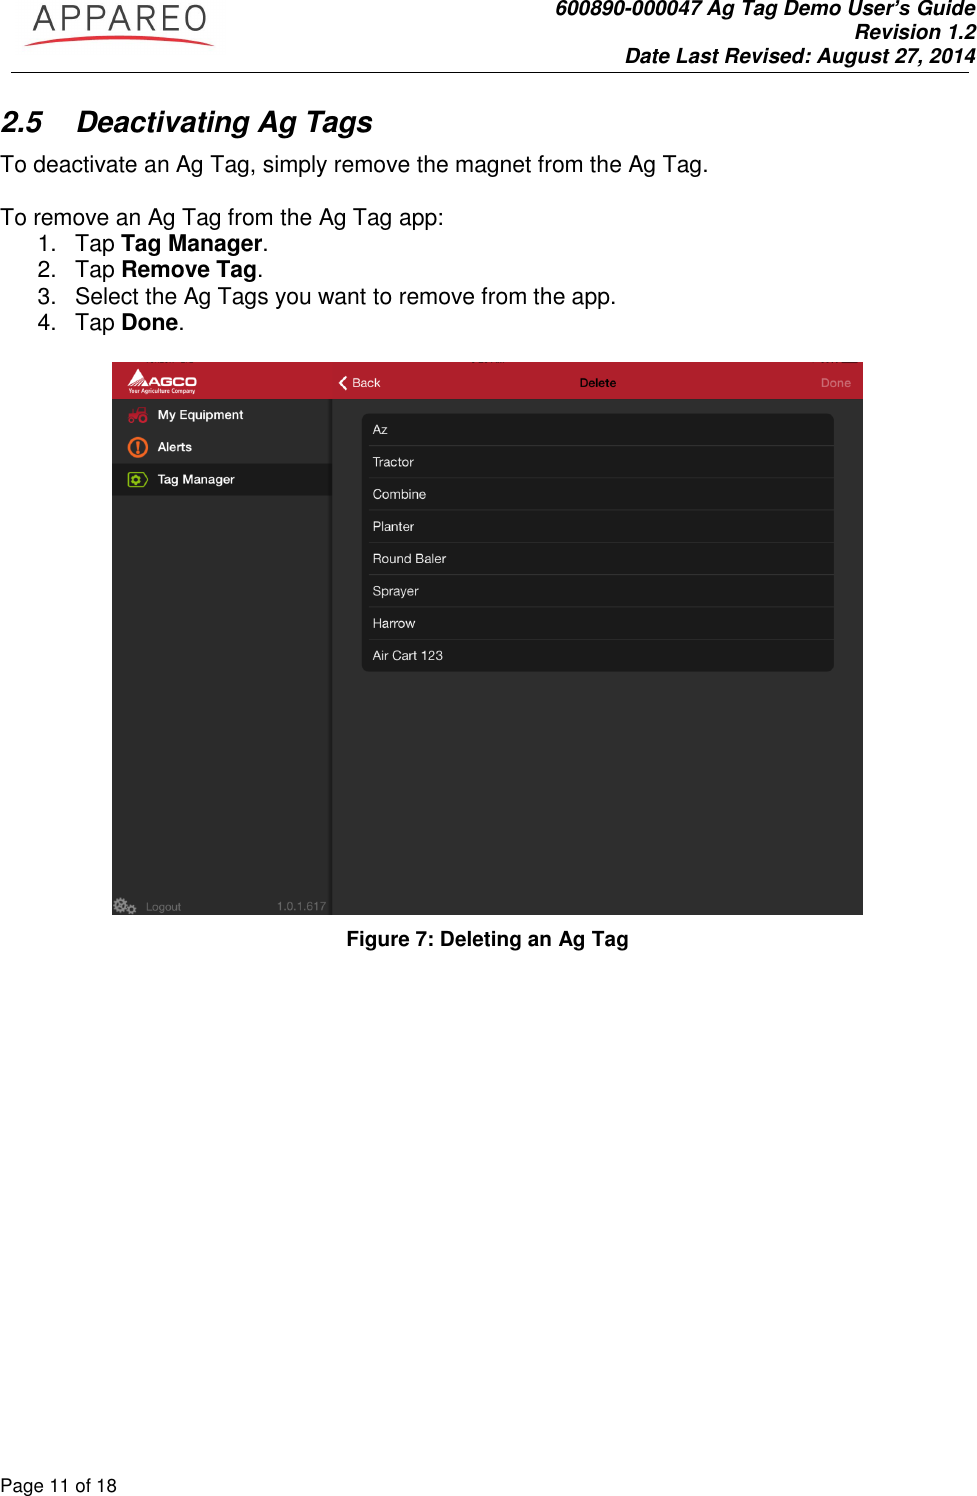               600890-000047 Ag Tag Demo User’s Guide   Revision 1.2 Date Last Revised: August 27, 2014 Page 11 of 18       2.5  Deactivating Ag Tags To deactivate an Ag Tag, simply remove the magnet from the Ag Tag.   To remove an Ag Tag from the Ag Tag app: 1.  Tap Tag Manager. 2.  Tap Remove Tag. 3.  Select the Ag Tags you want to remove from the app. 4.  Tap Done.   Figure 7: Deleting an Ag Tag 